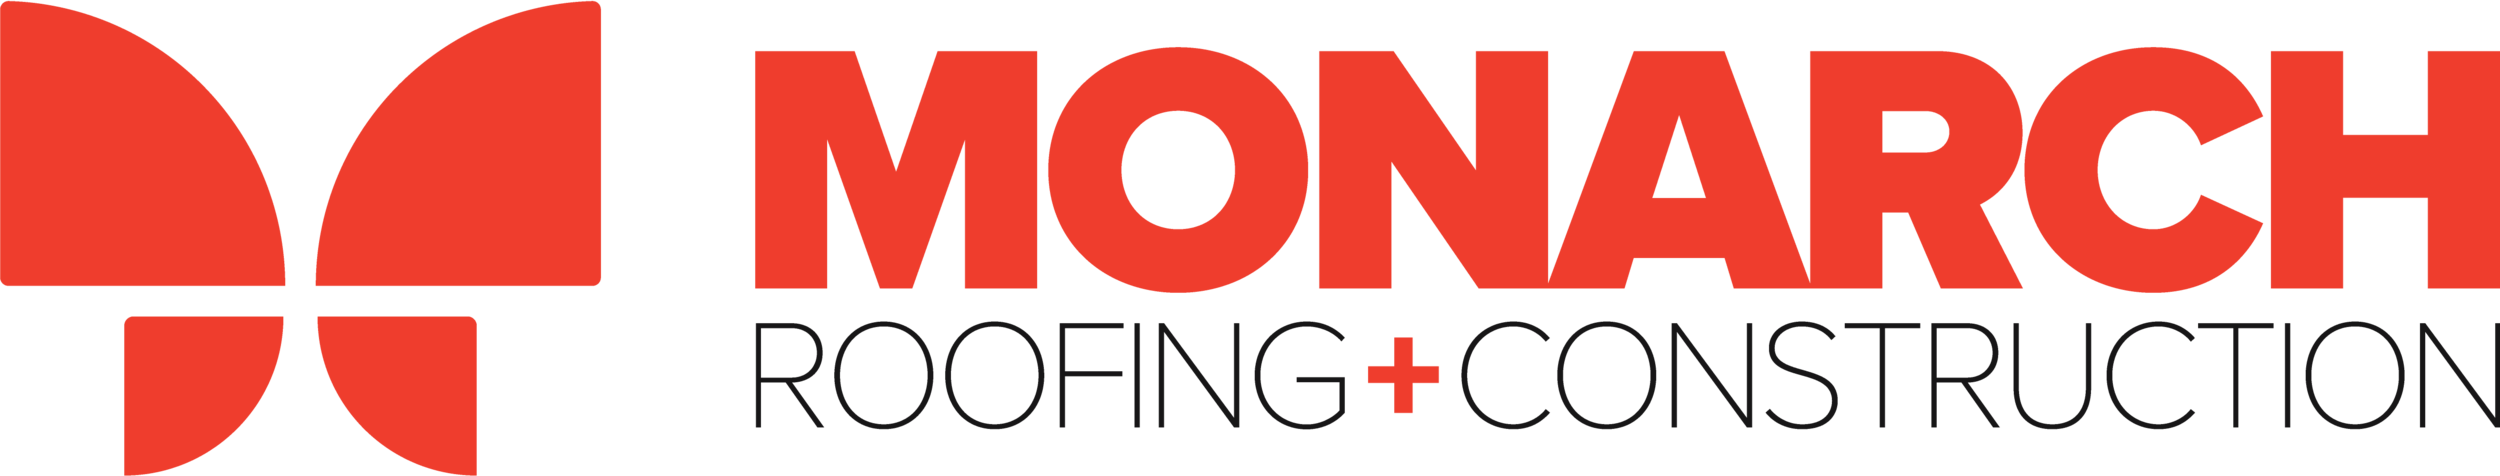 Monarch Roofing + Construction